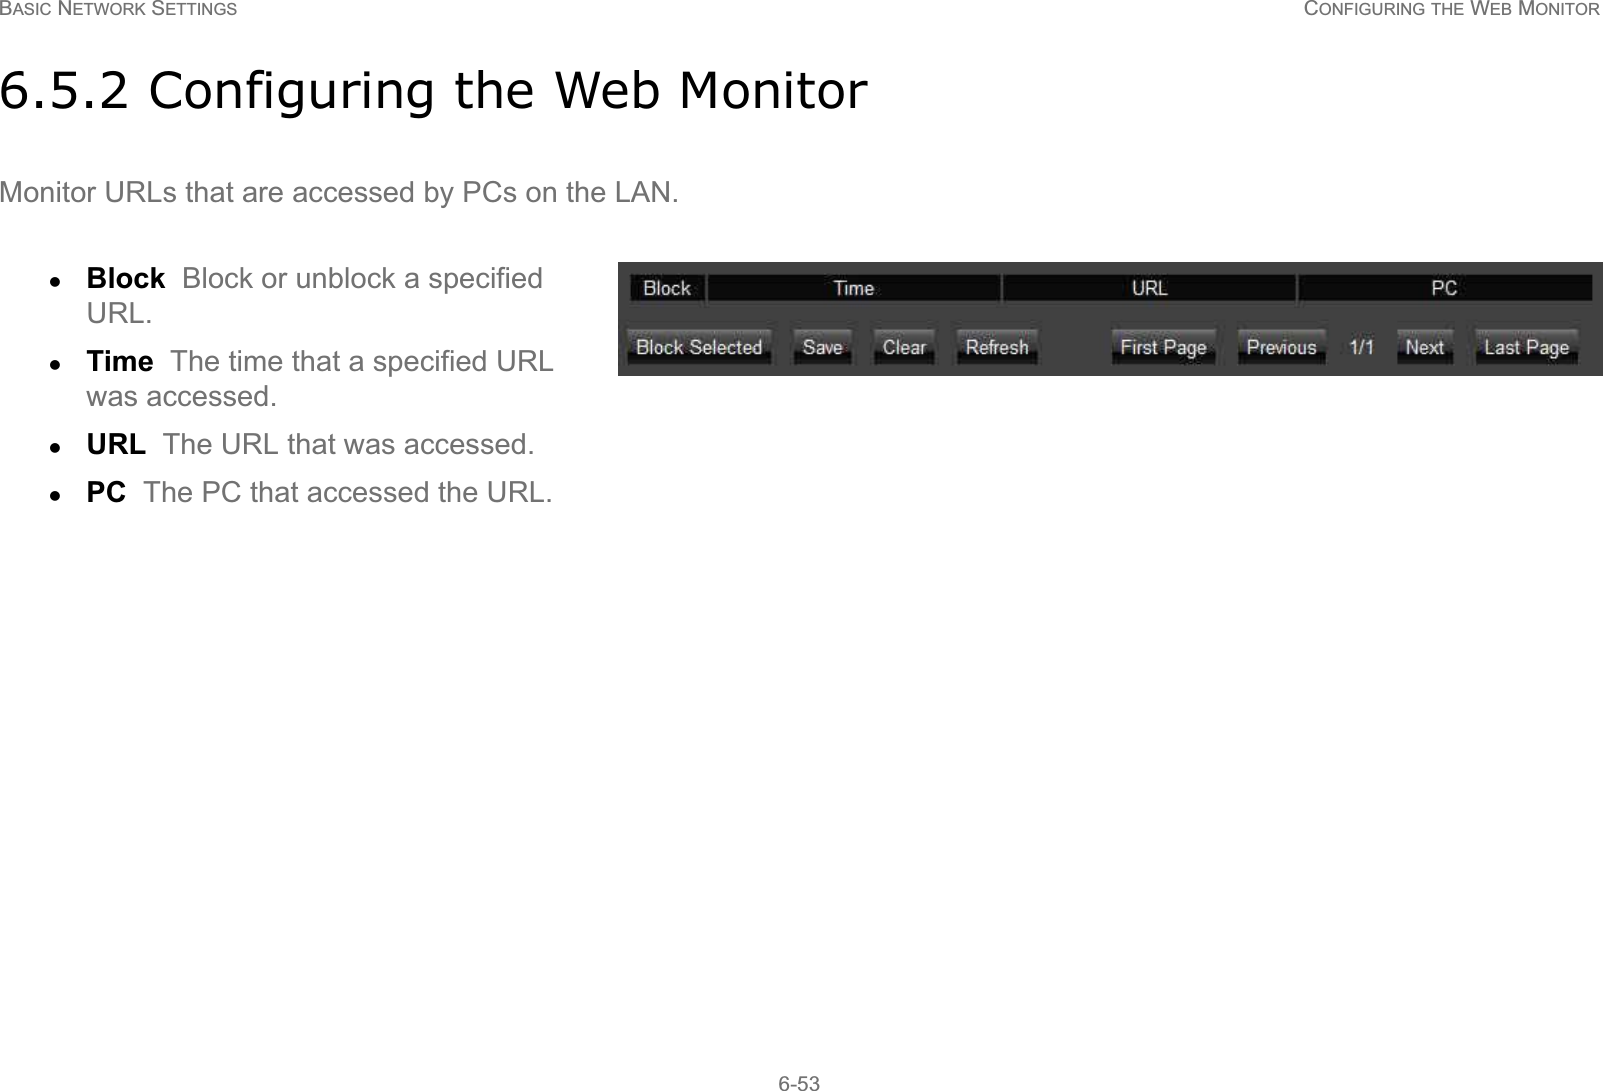 BASIC NETWORK SETTINGS CONFIGURING THE WEB MONITOR6-536.5.2 Configuring the Web MonitorMonitor URLs that are accessed by PCs on the LAN.zBlock  Block or unblock a specified URL.zTime  The time that a specified URL was accessed.zURL  The URL that was accessed.zPC  The PC that accessed the URL.